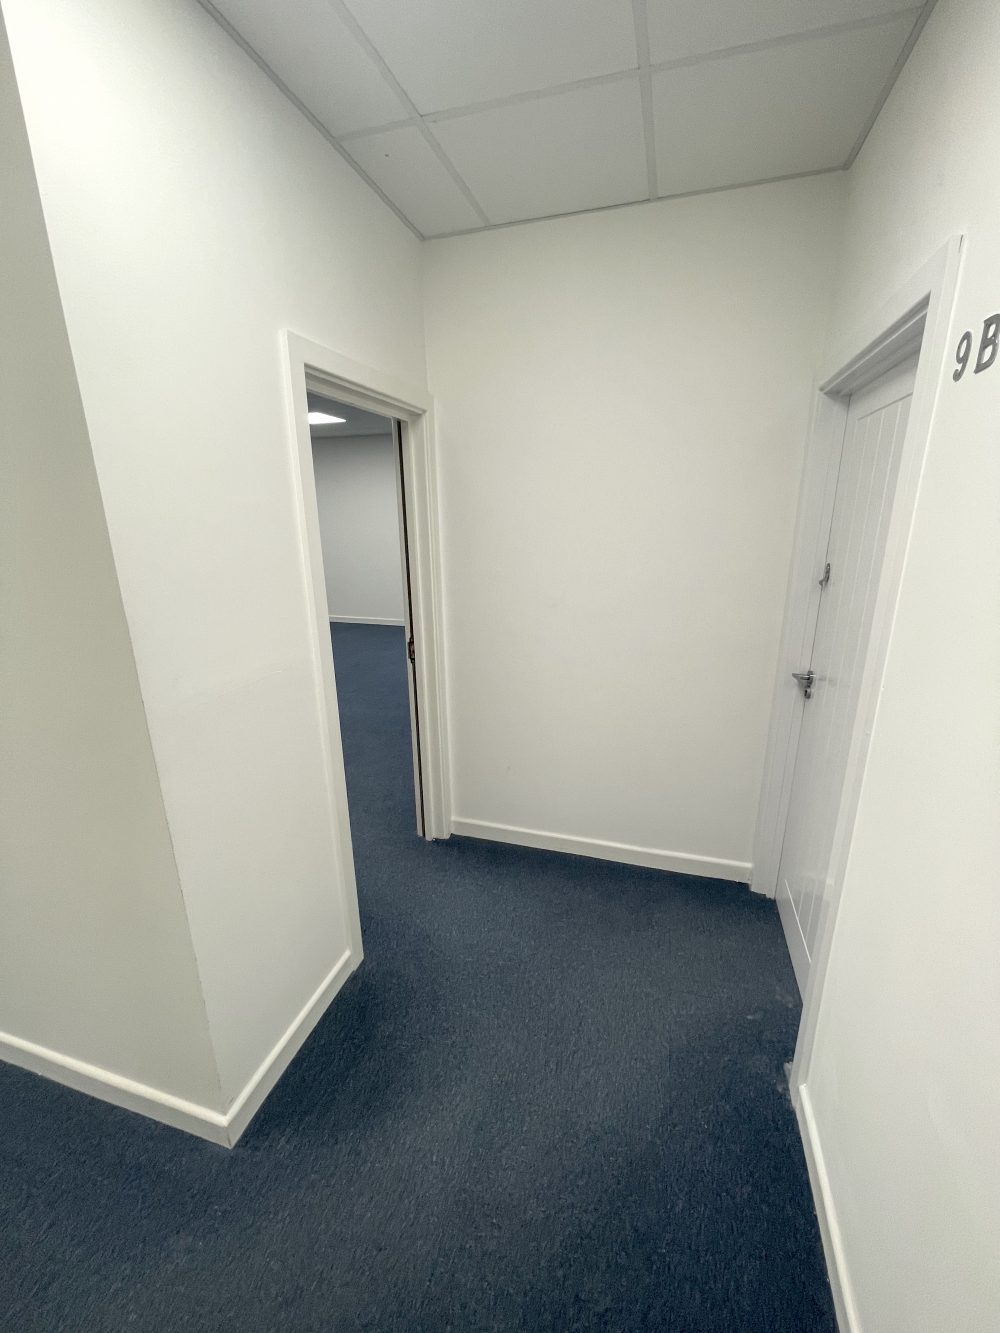 First floor office space : light idustrial creative artist studio to rent in E18 S South Woodford Pic 17